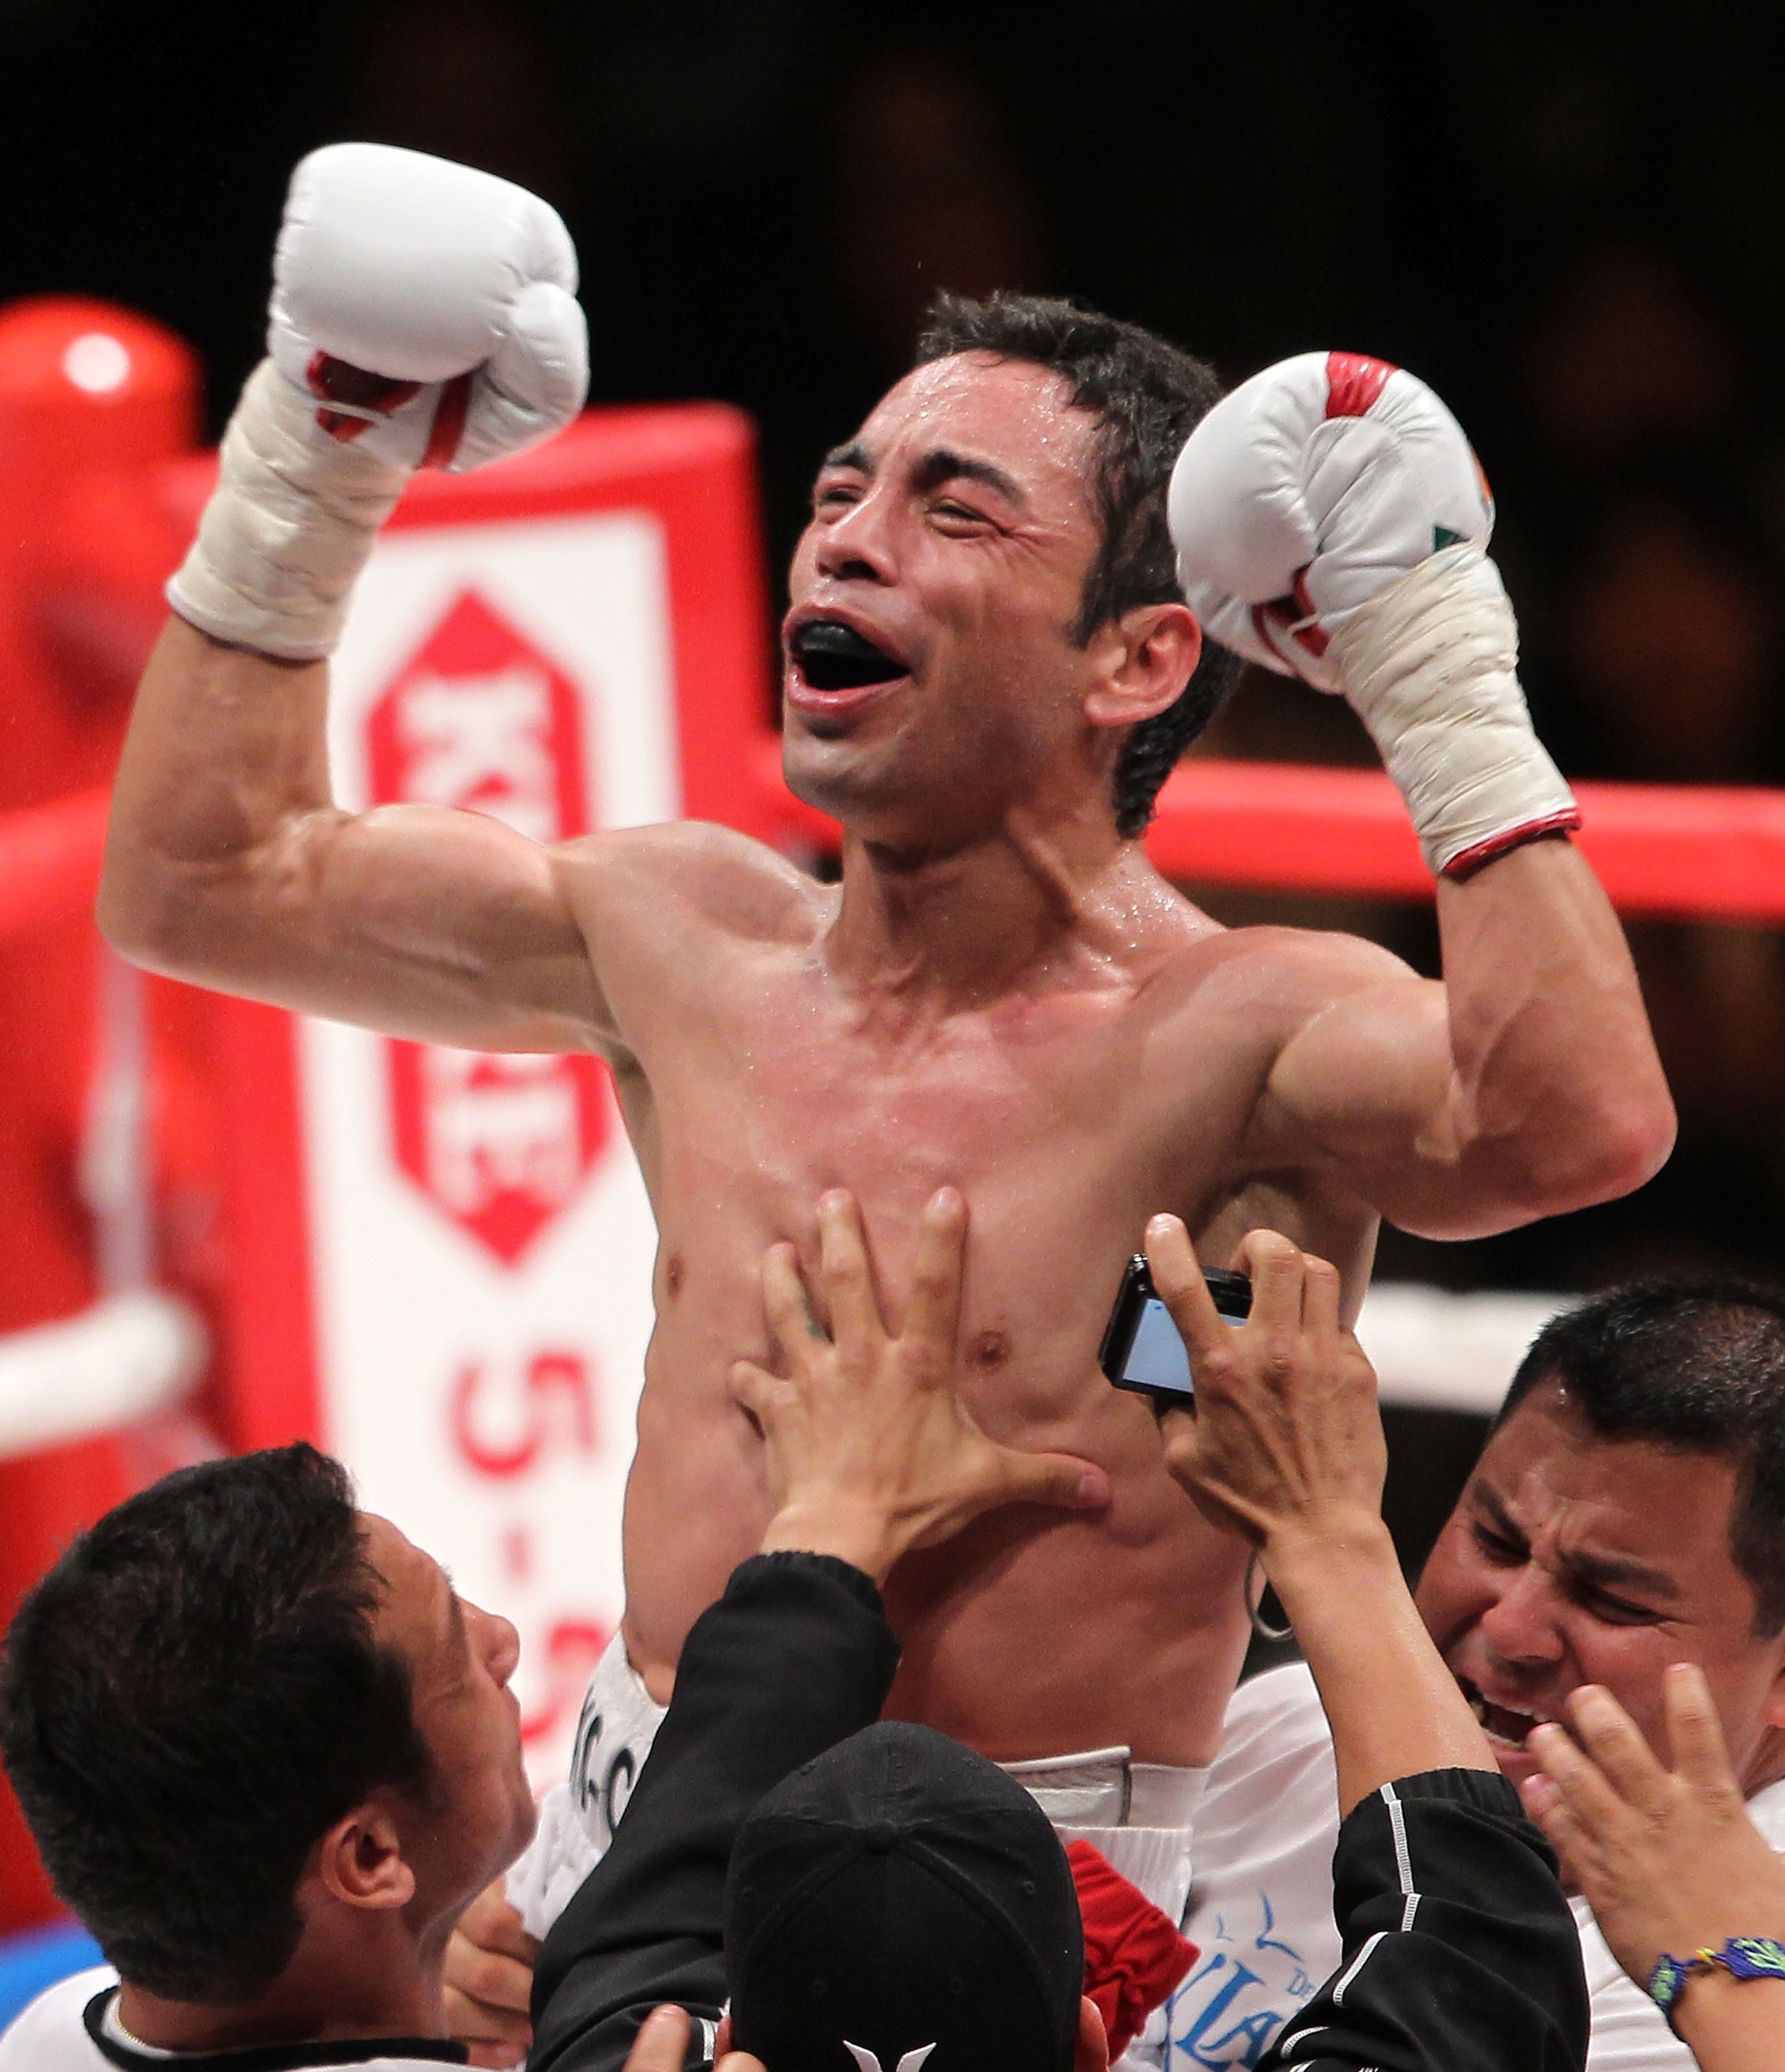 TOKYO - APRIL 30:  Fernando Montiel of Mexico celebrates after knocking out Hozumi Hasegawa of Japan during the WBC Bantamweight Title Fight between Hozumi Hasegawa and Fernando Montiel at Nippon Budokan on April 30, 2010 in Tokyo, Japan.  (Photo by Koich